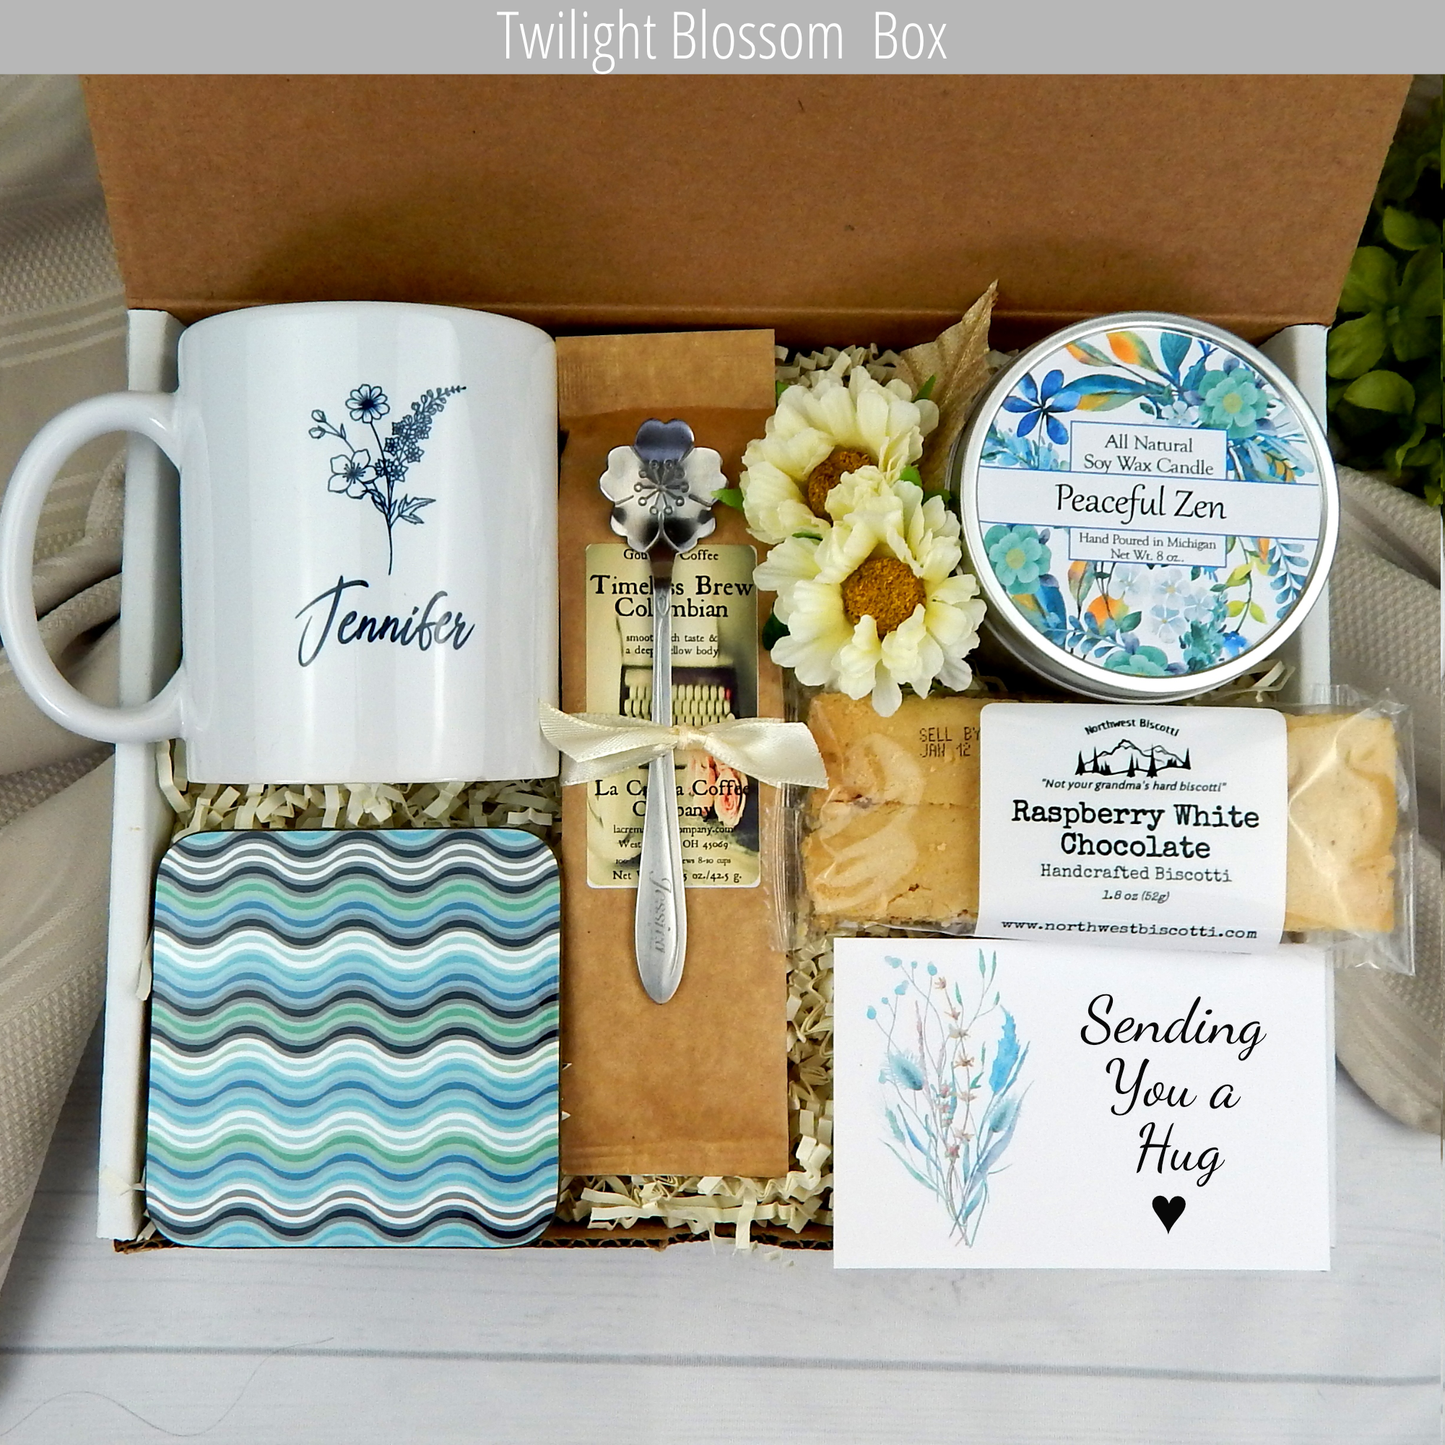 Encouragement gift basket filled with coffee, a customized mug, and thoughtful goodies to uplift her spirit.